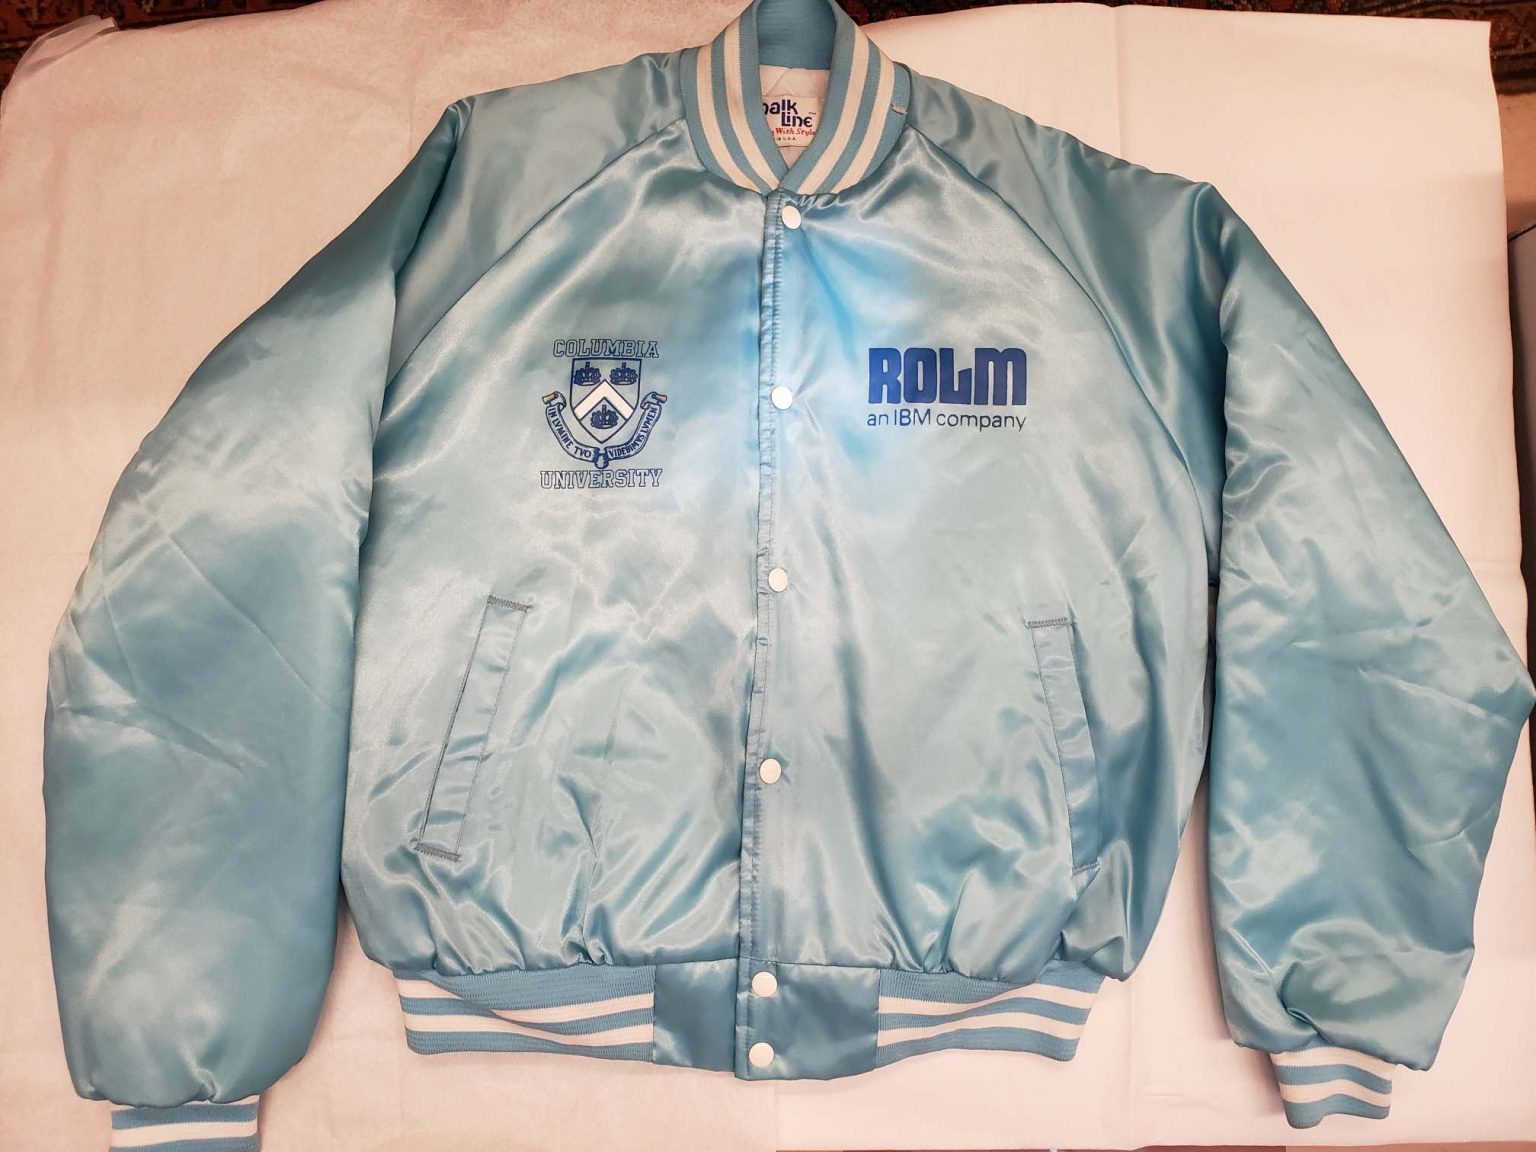 new-acquisition-ibm-rolm-phone-commemorative-jacket-news-from